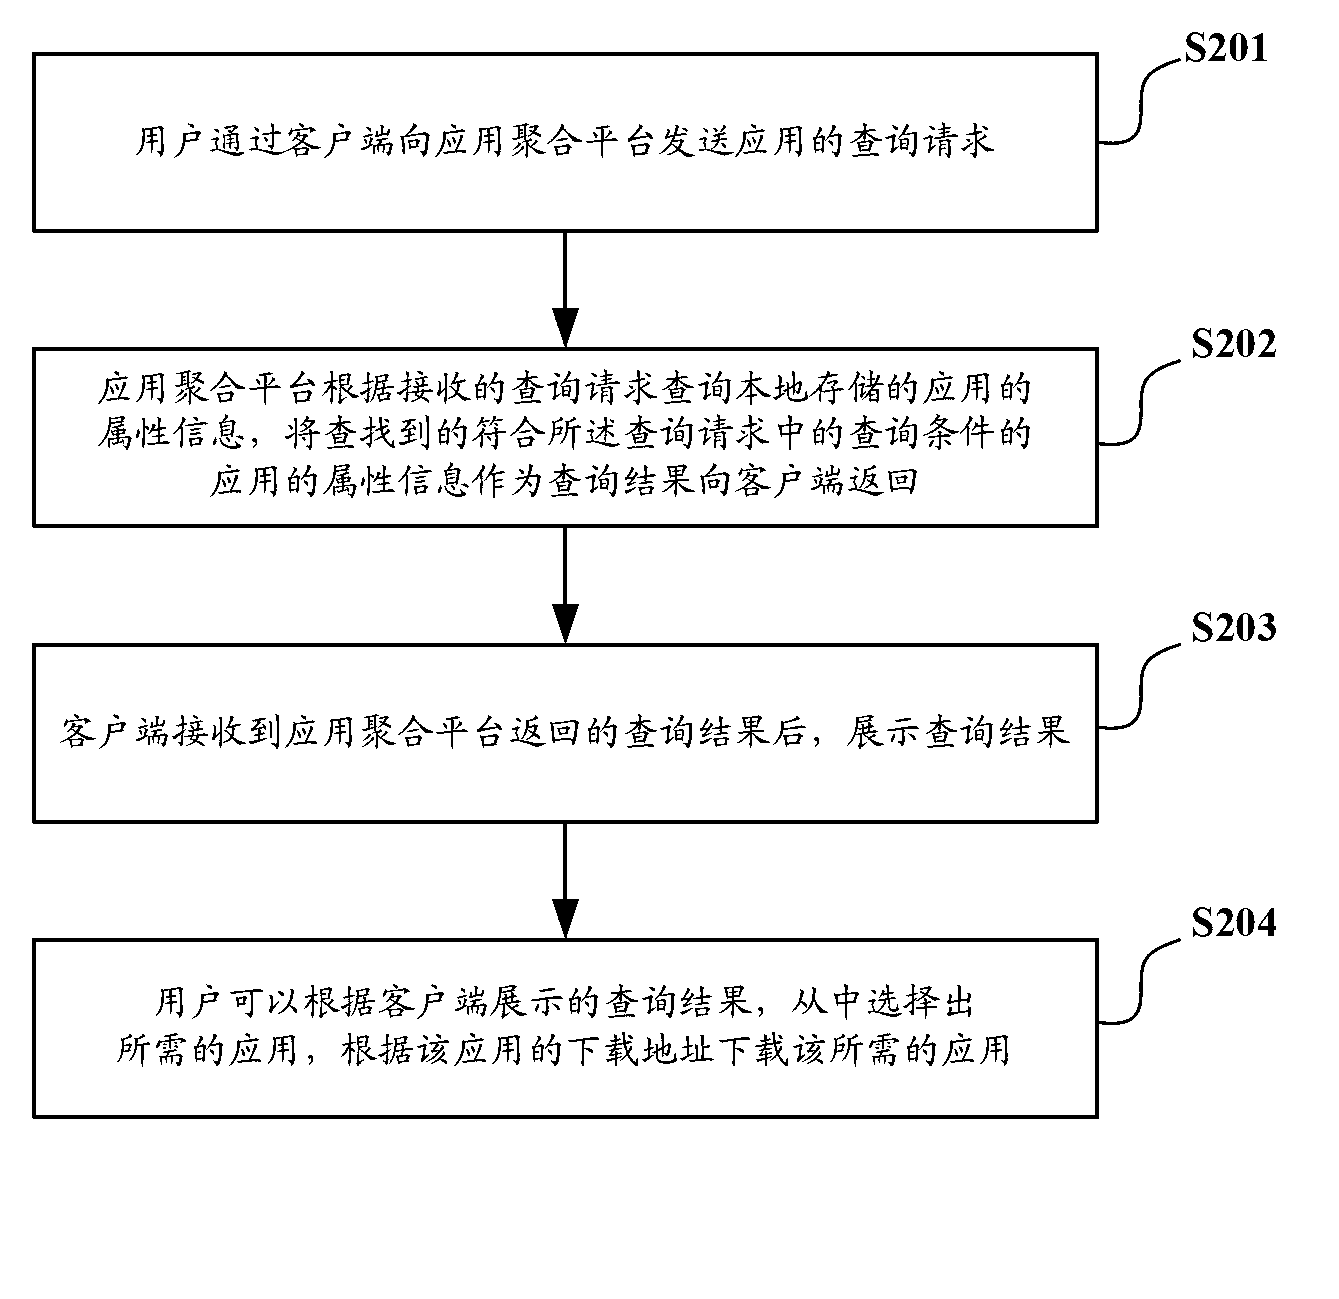 Application property information synchronization method and system with application aggregation platform